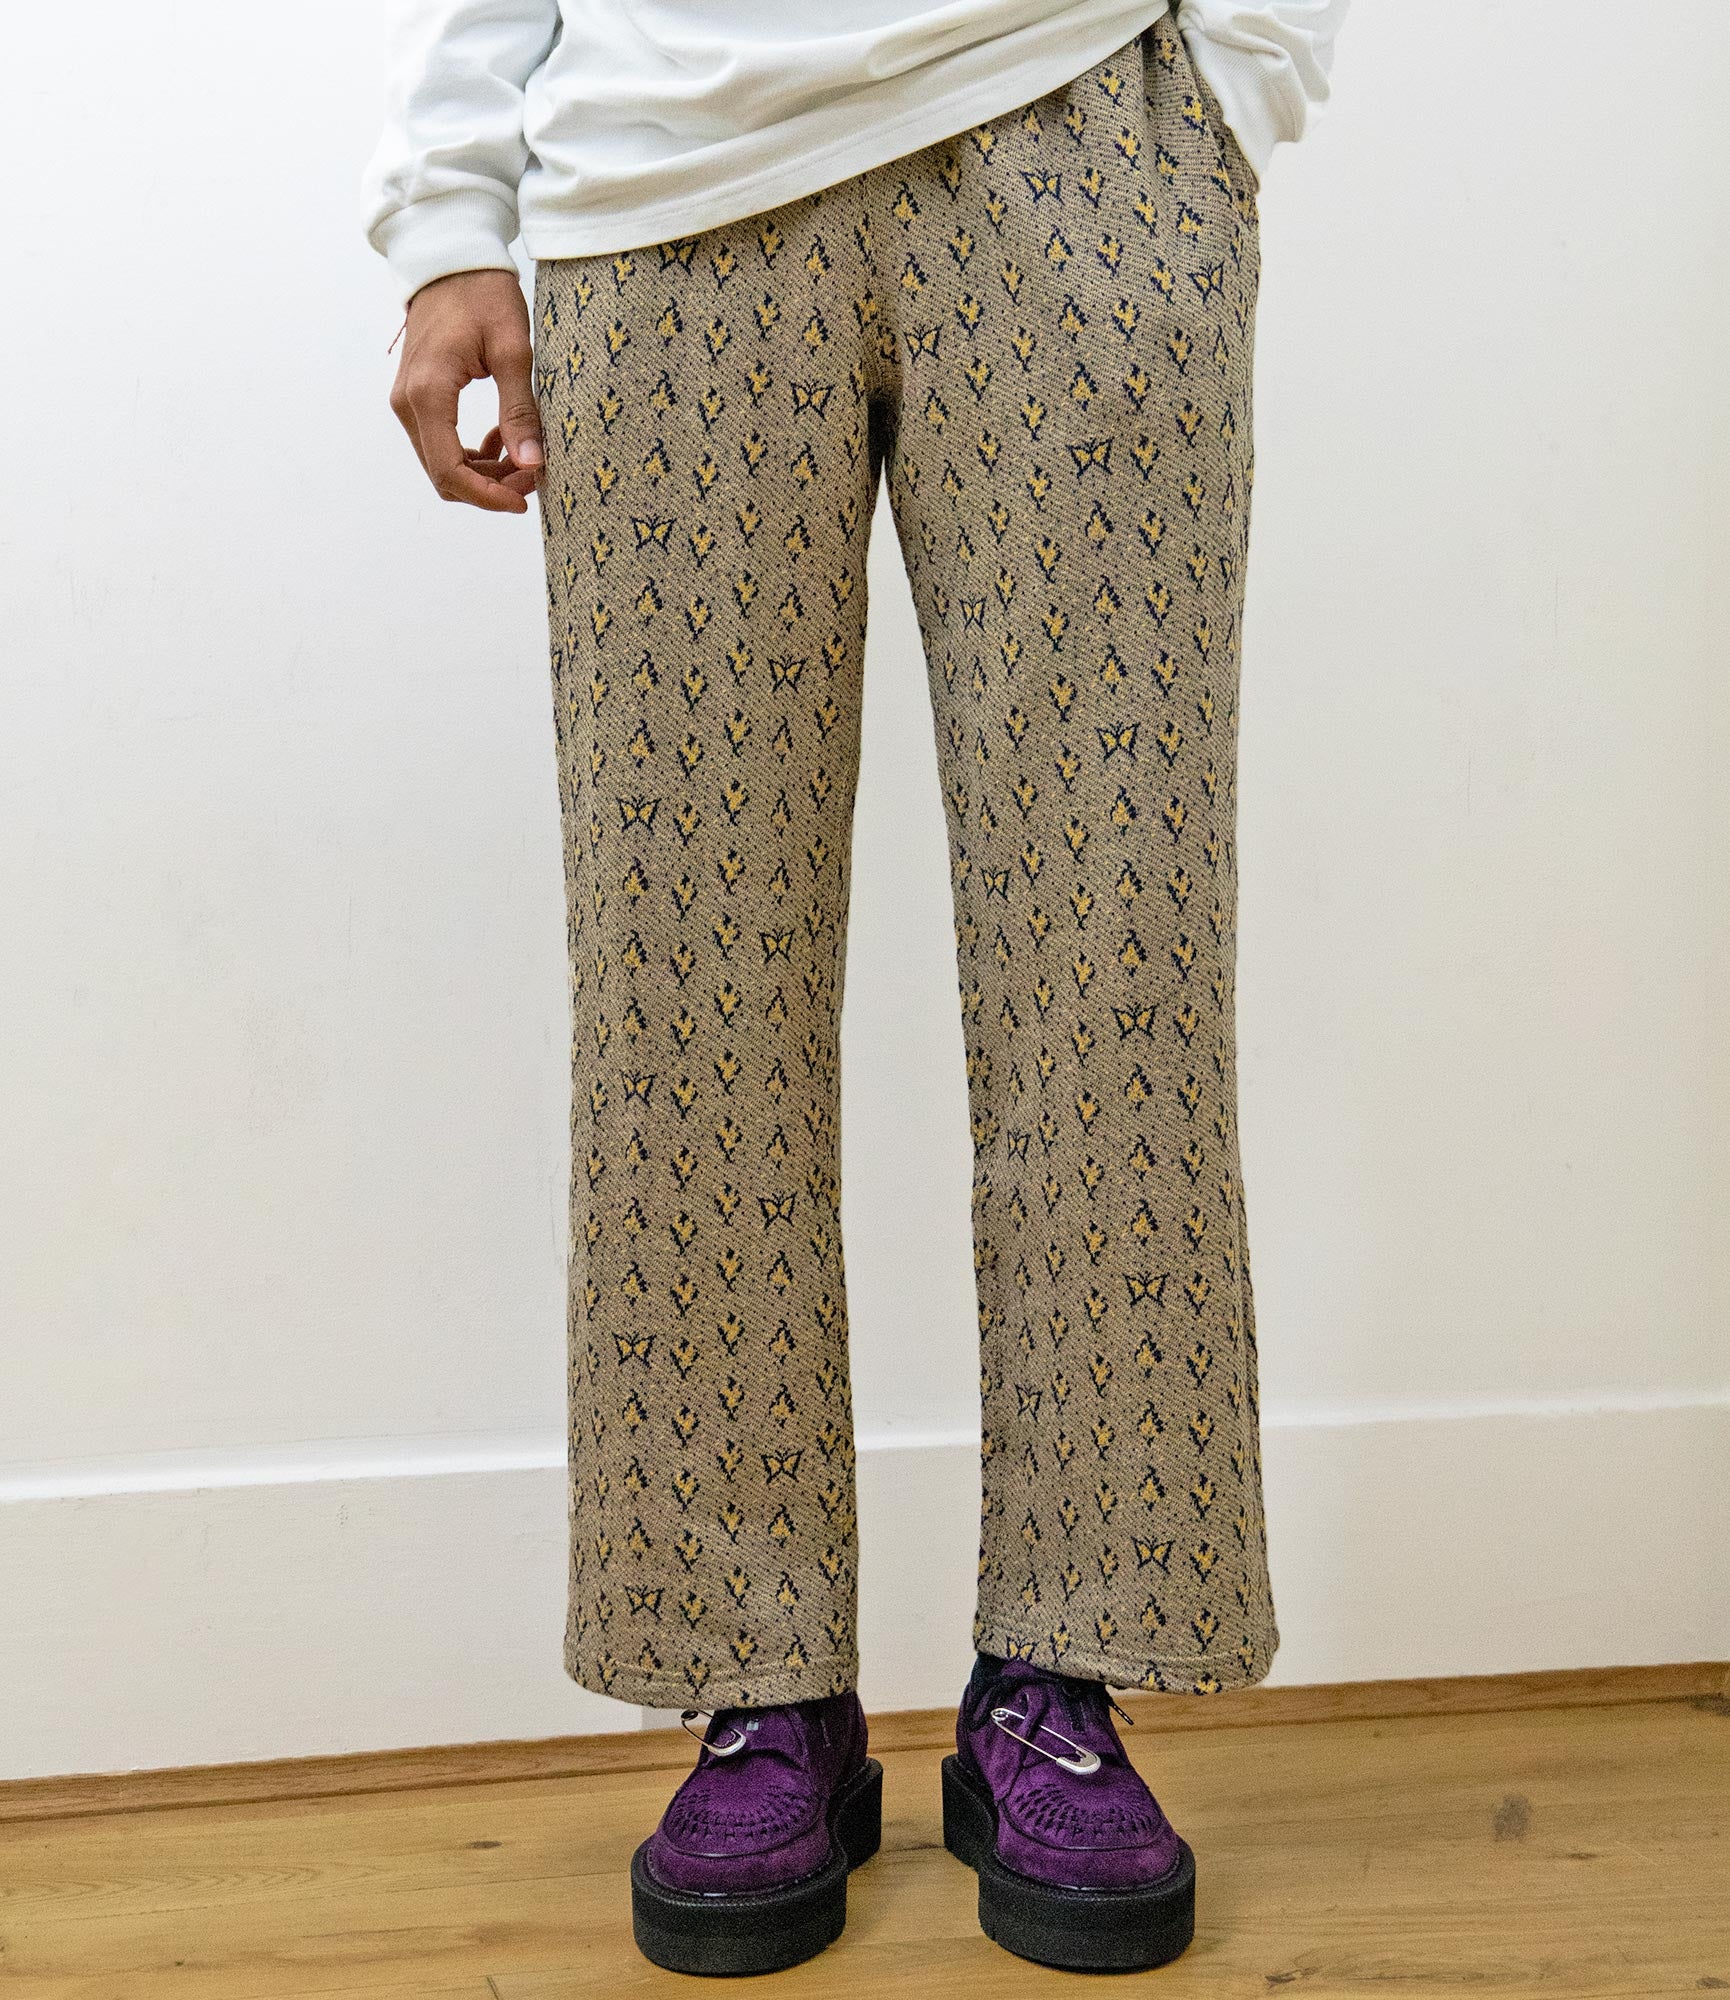 Needles String Easy Pant - C/AN Papillon&Floral Jq - Yellow/Navy